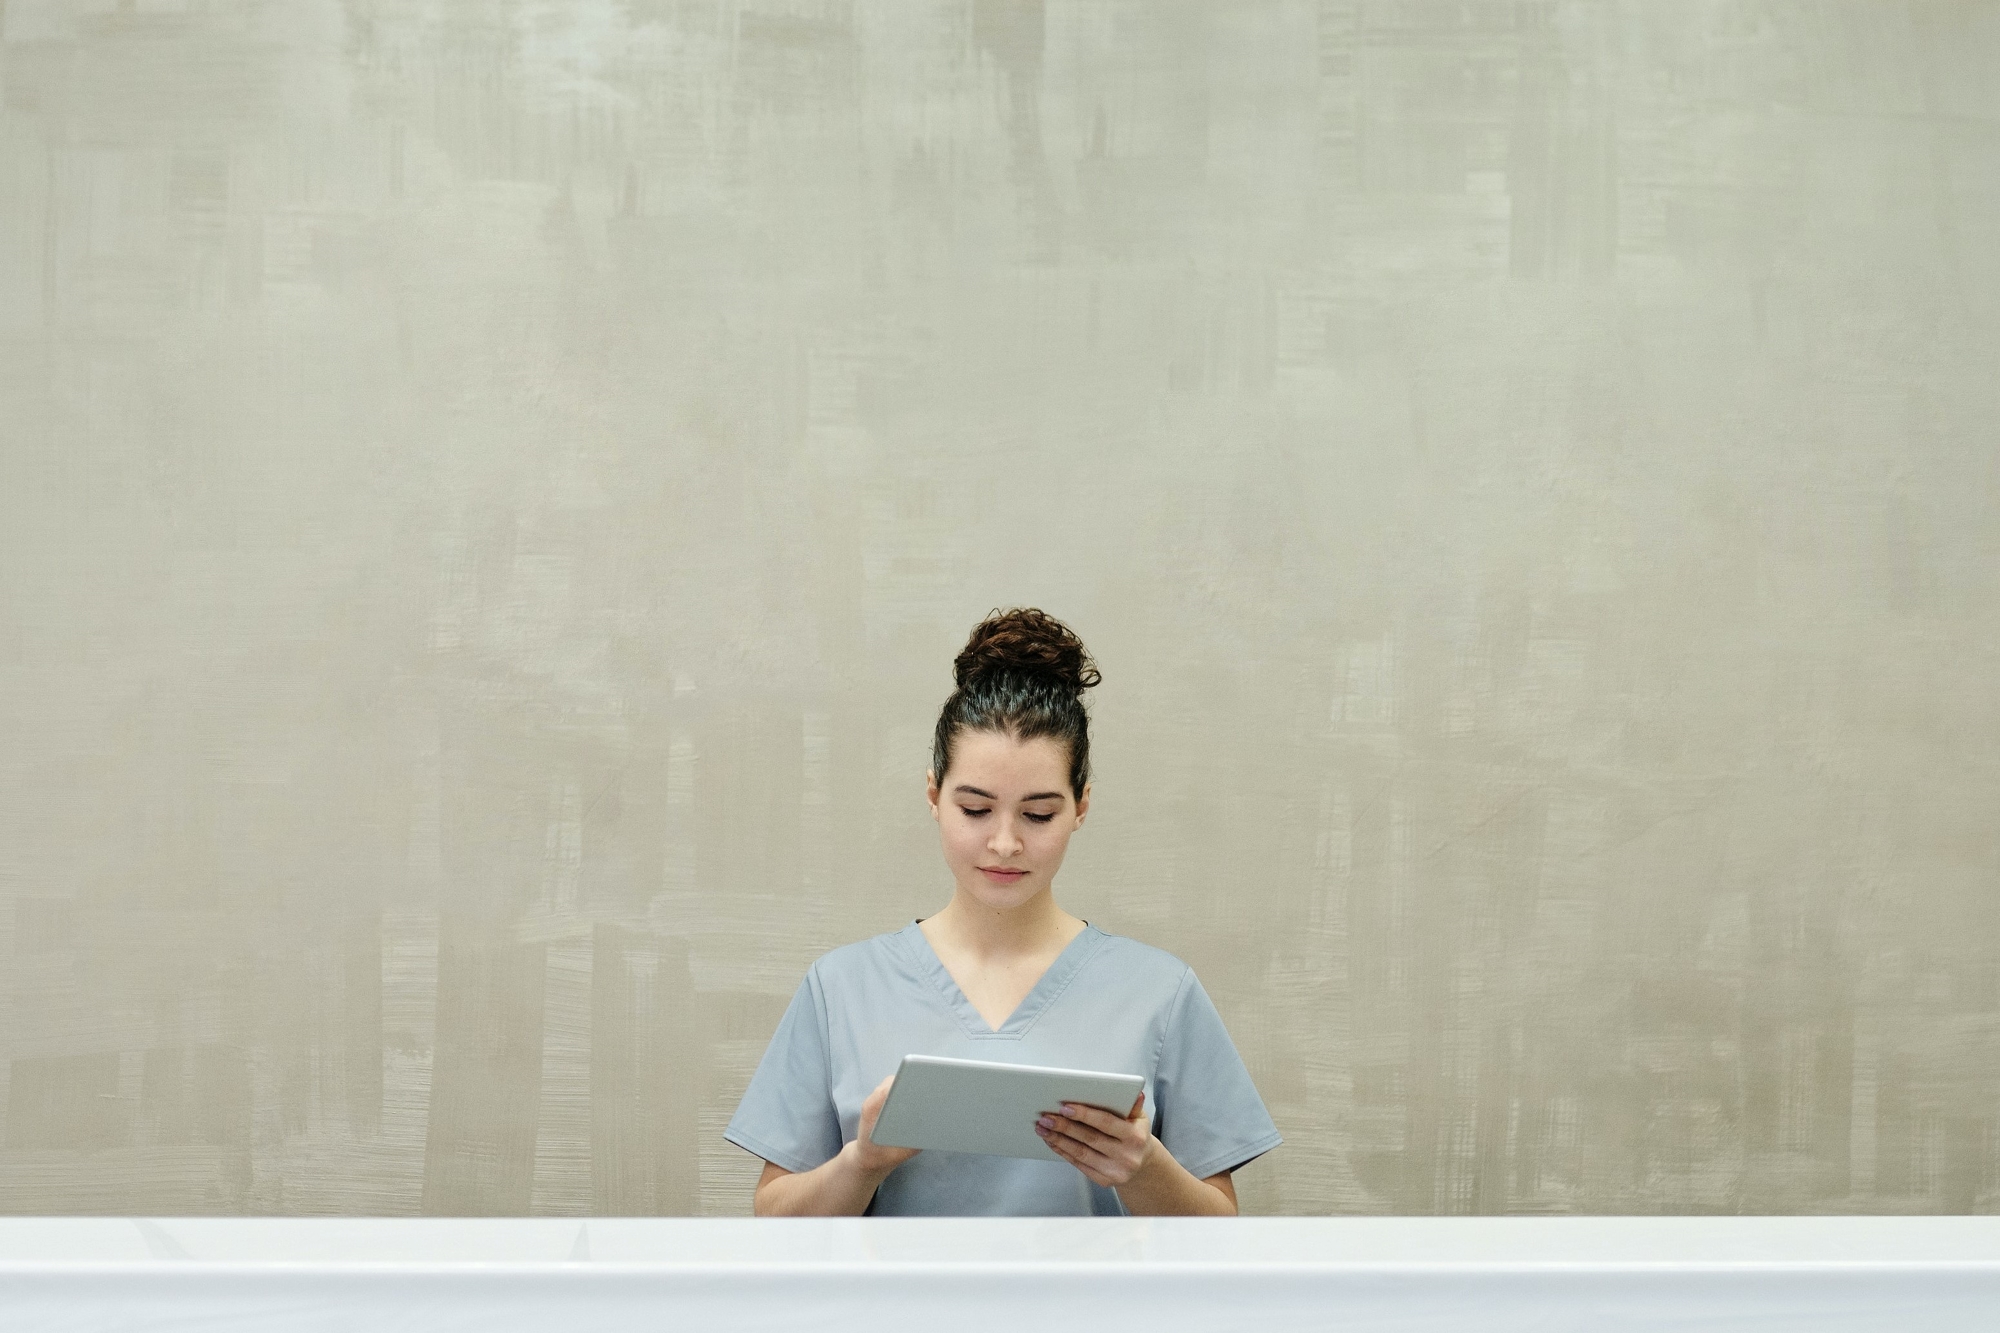 stock image of a woman using a tablet while standing in a hallway